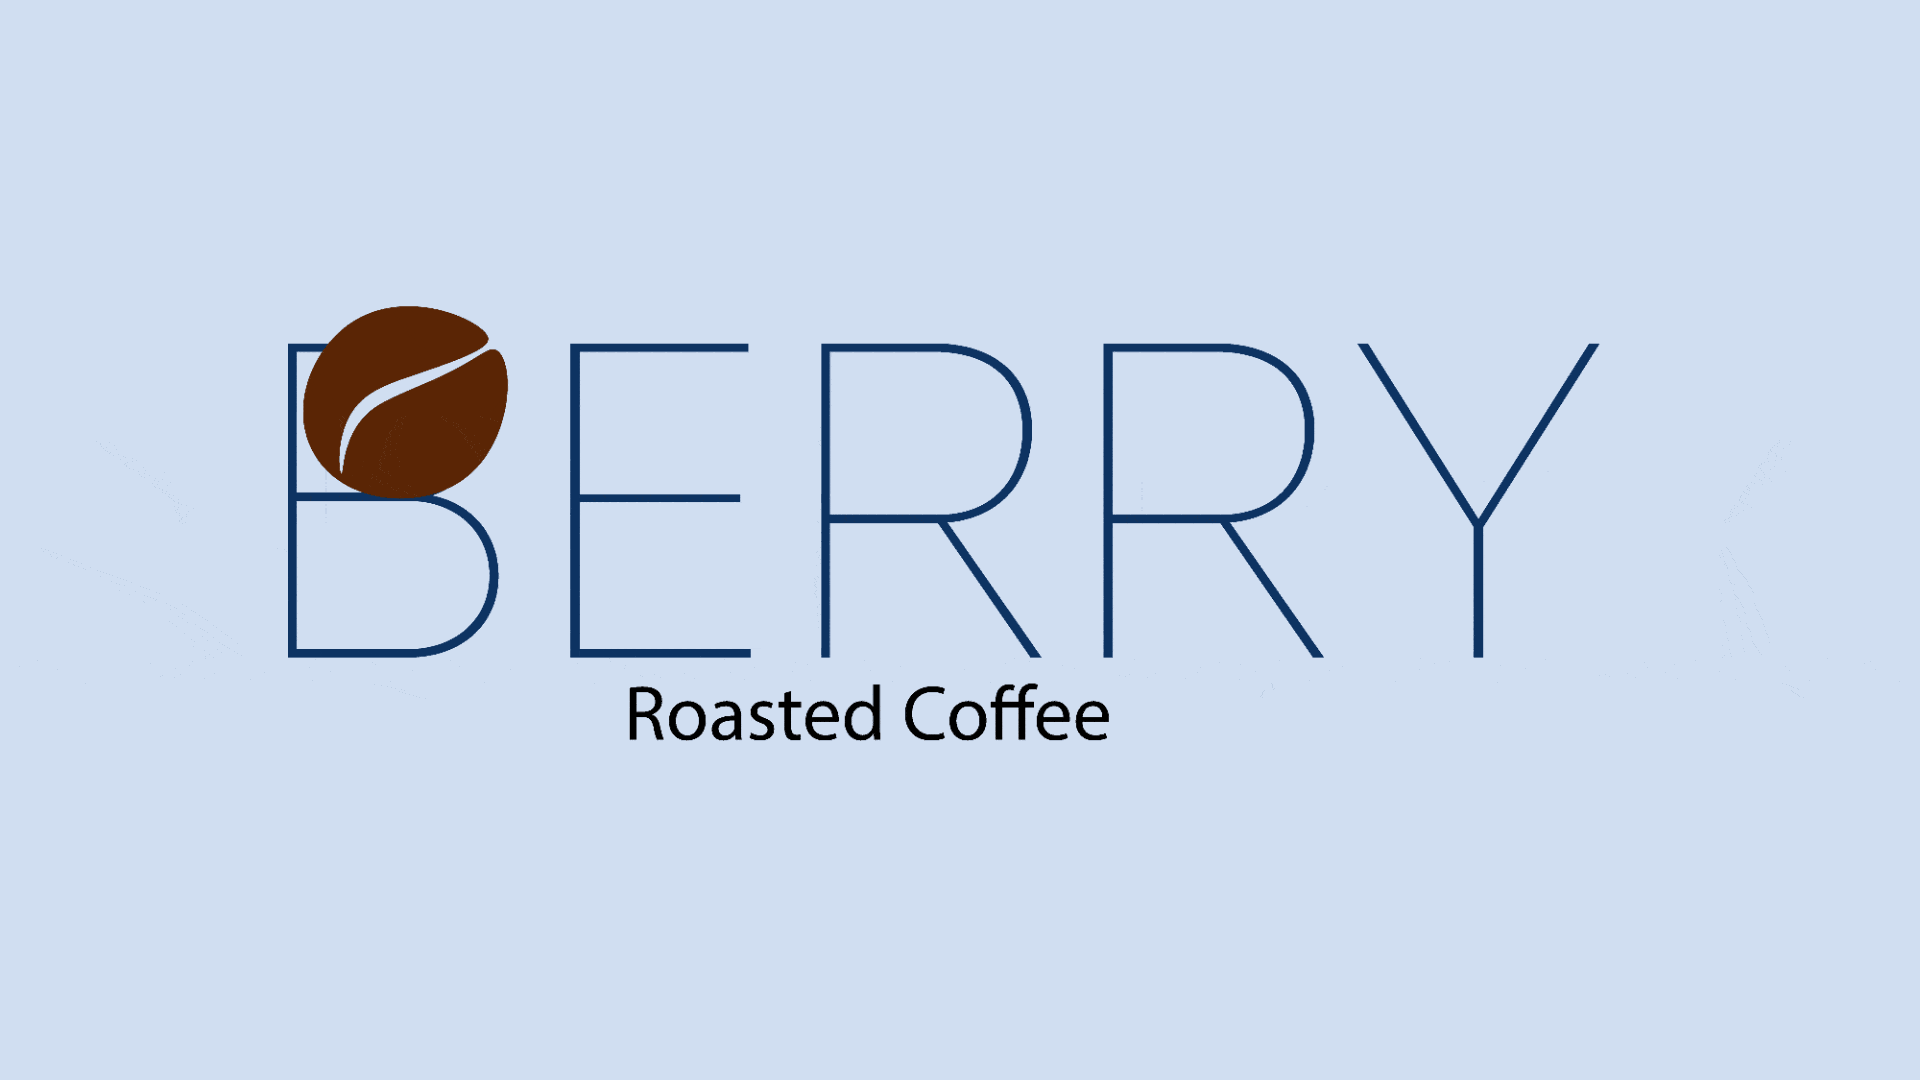 Gif of Sustainable packaging of Berry coffee products featuring the brand's distinctive logo.